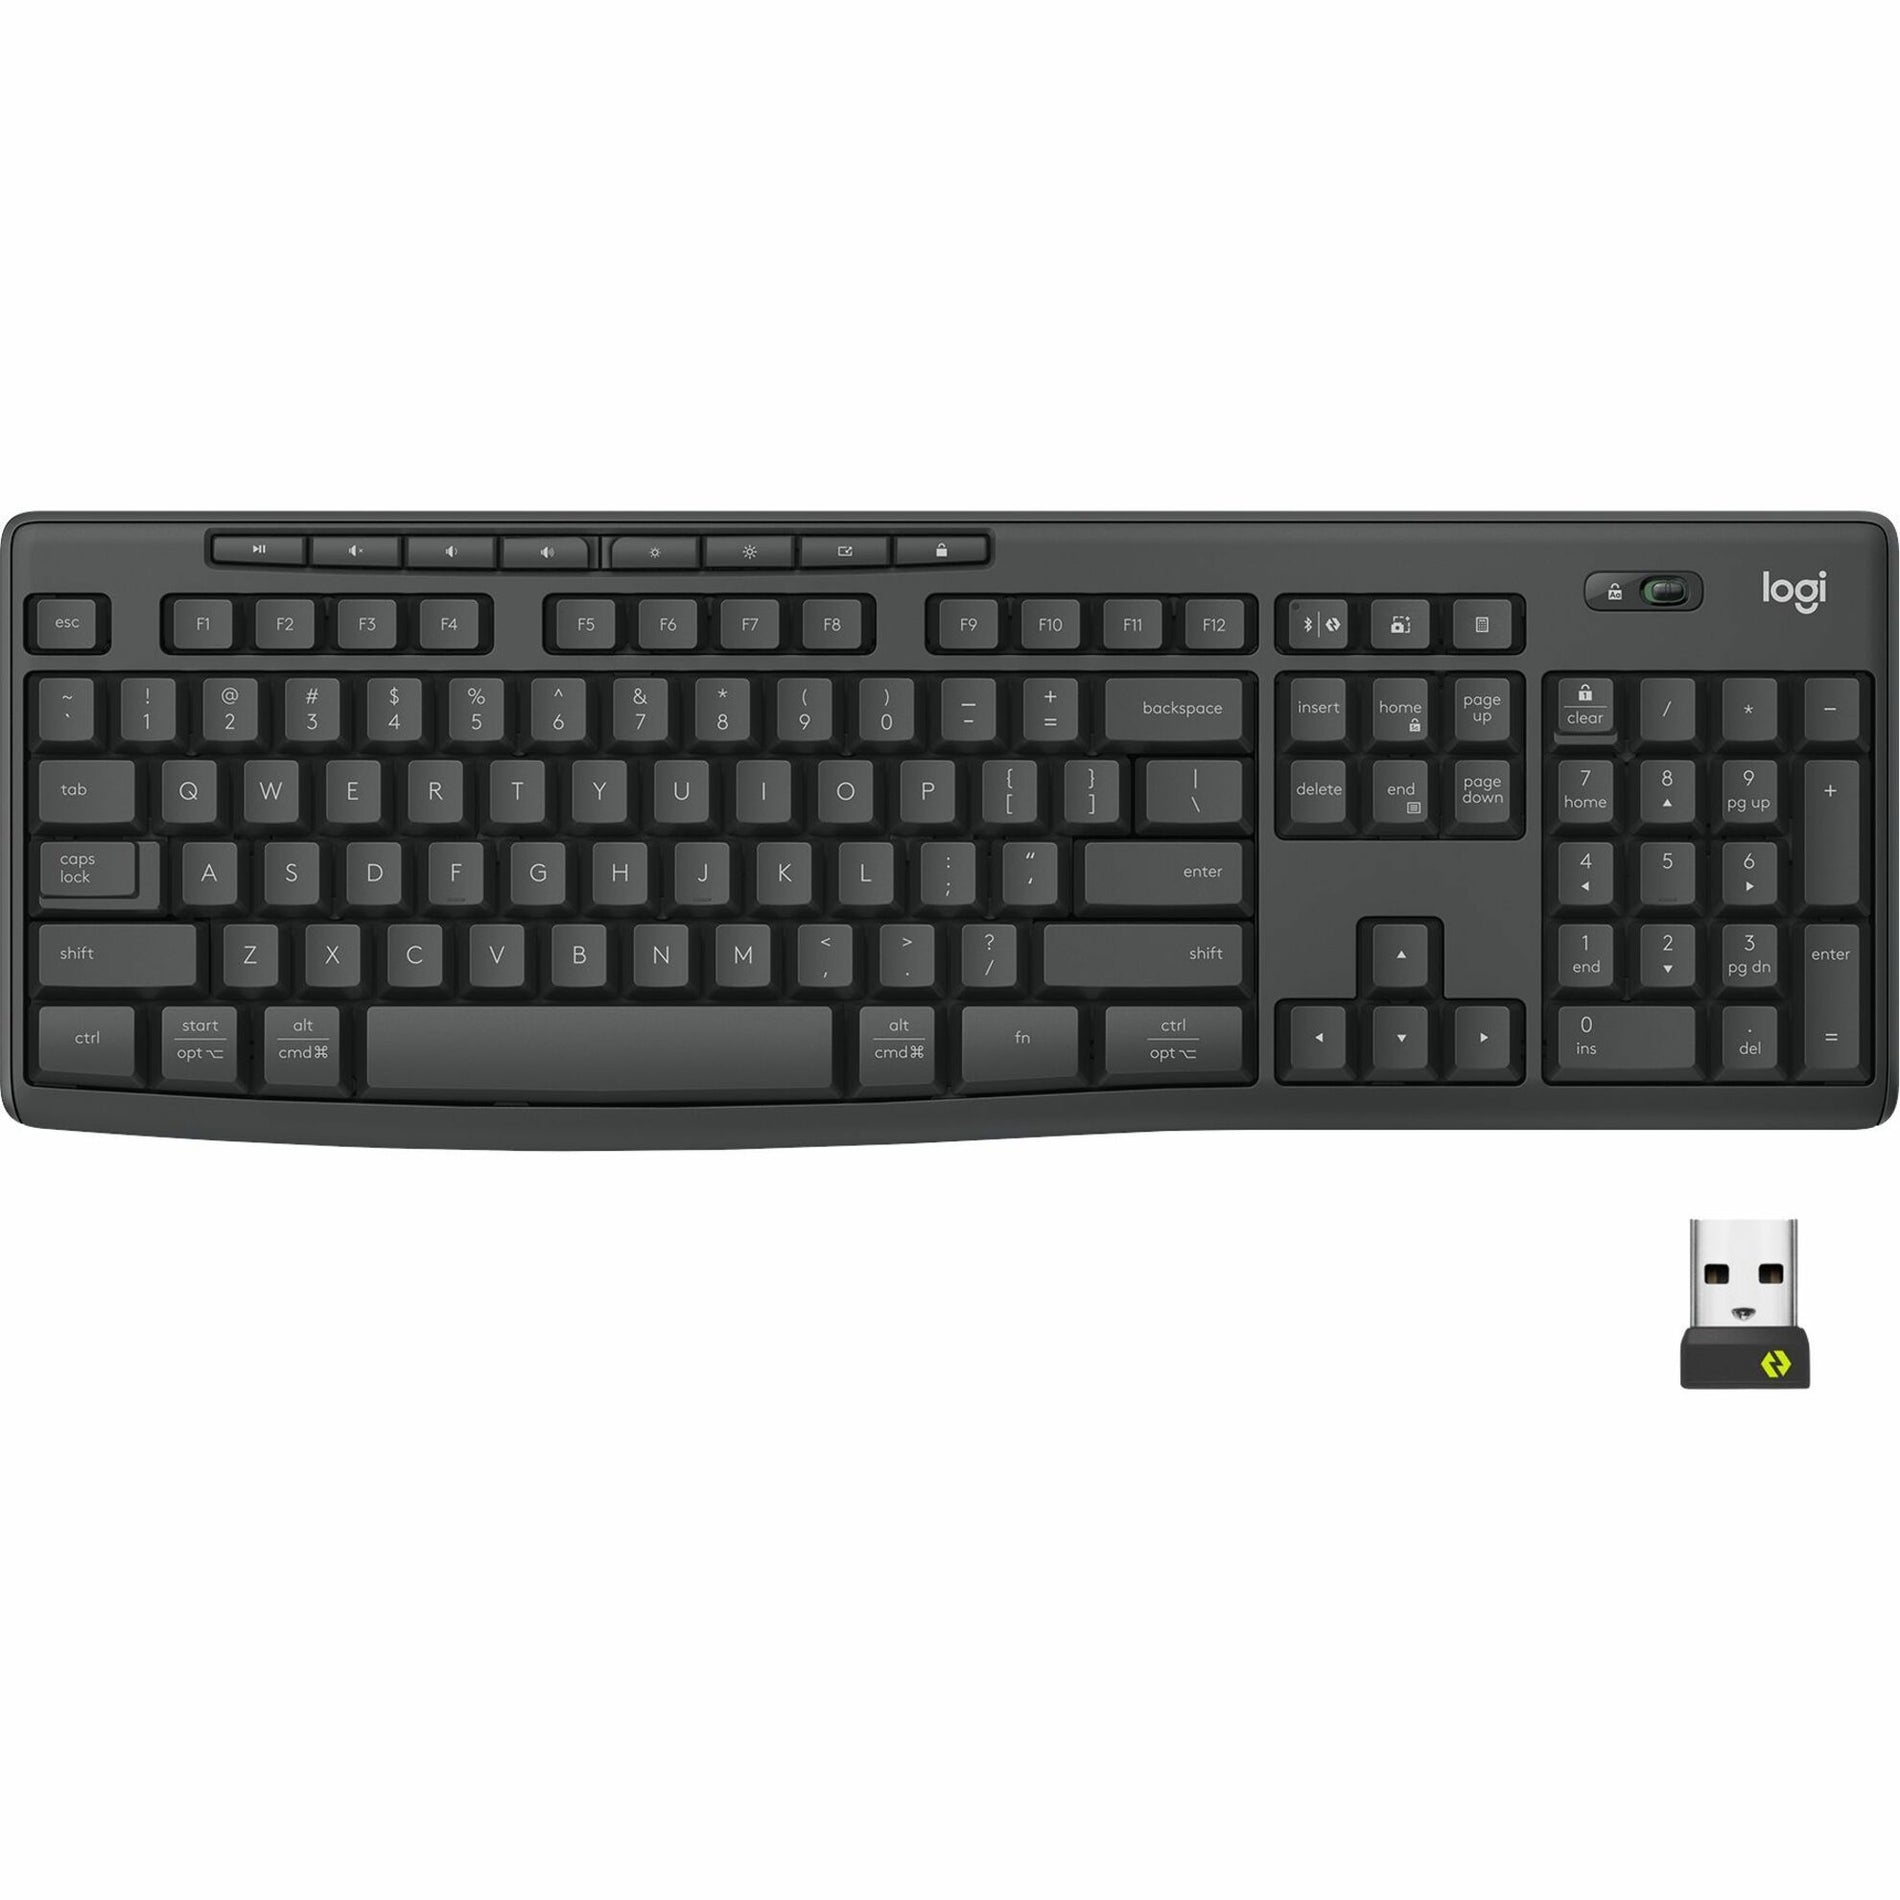 Logitech 920-011887 MK370 Combo for Business Wireless Keyboard and Silent Mouse, 2-Year Warranty, Graphite